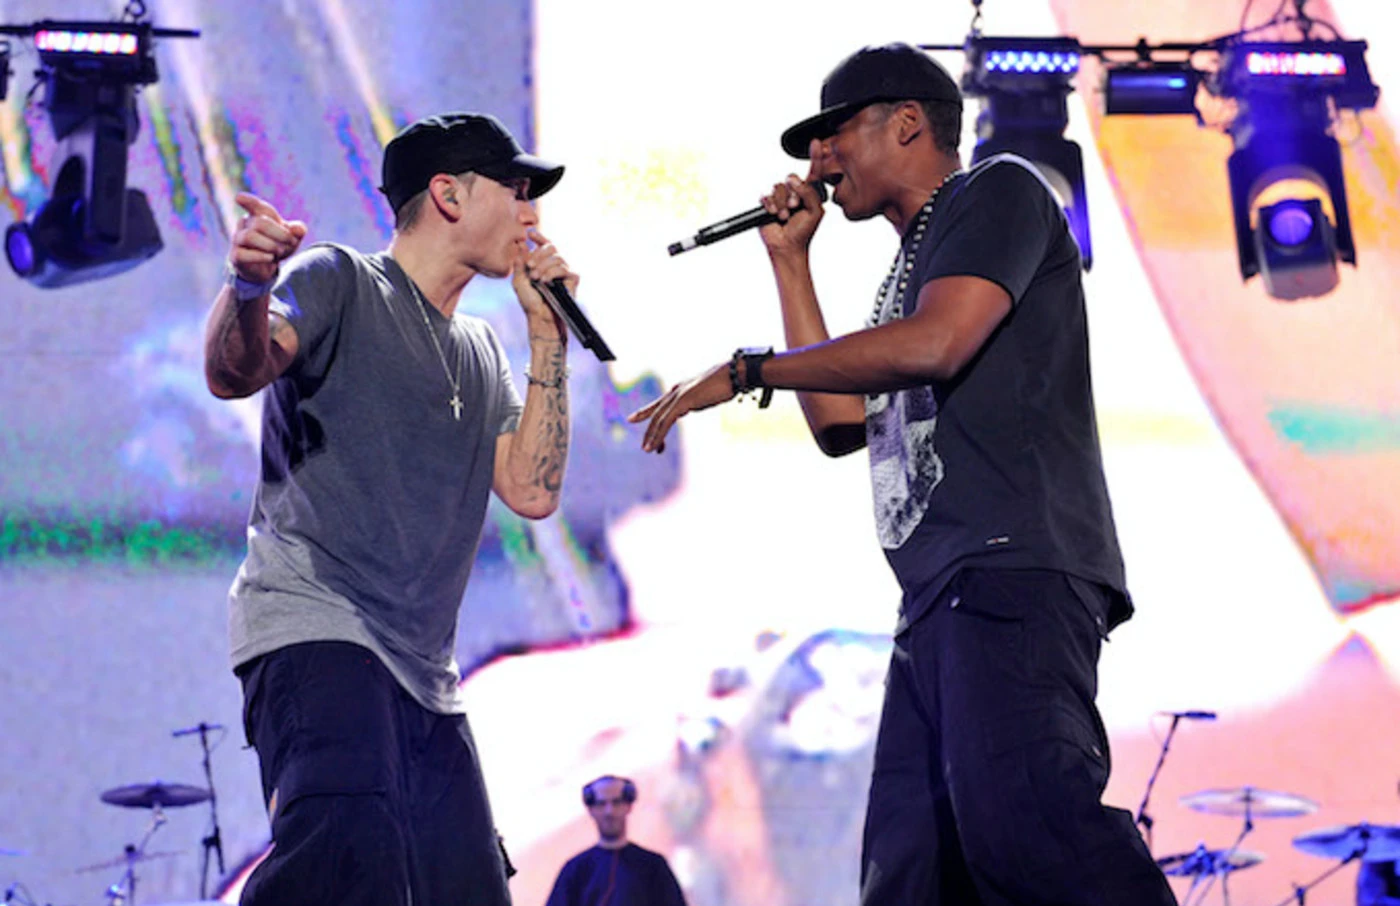 Eminem and Jay-Z performing on stage.